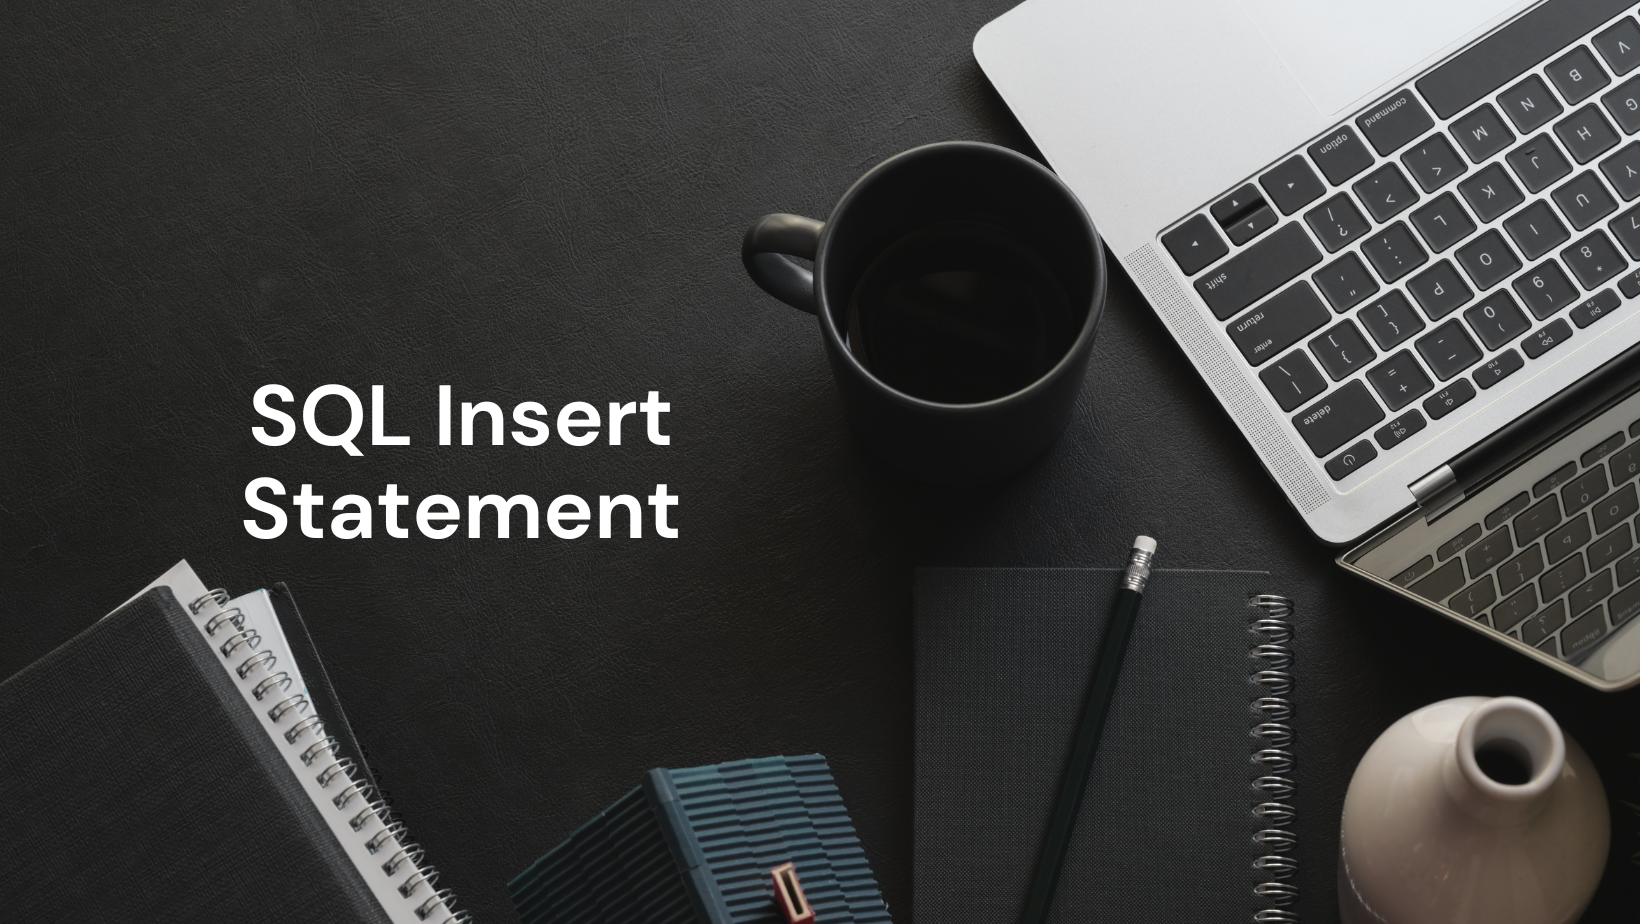 SQL INSERT Statement – How to Insert Data into a Table in SQL